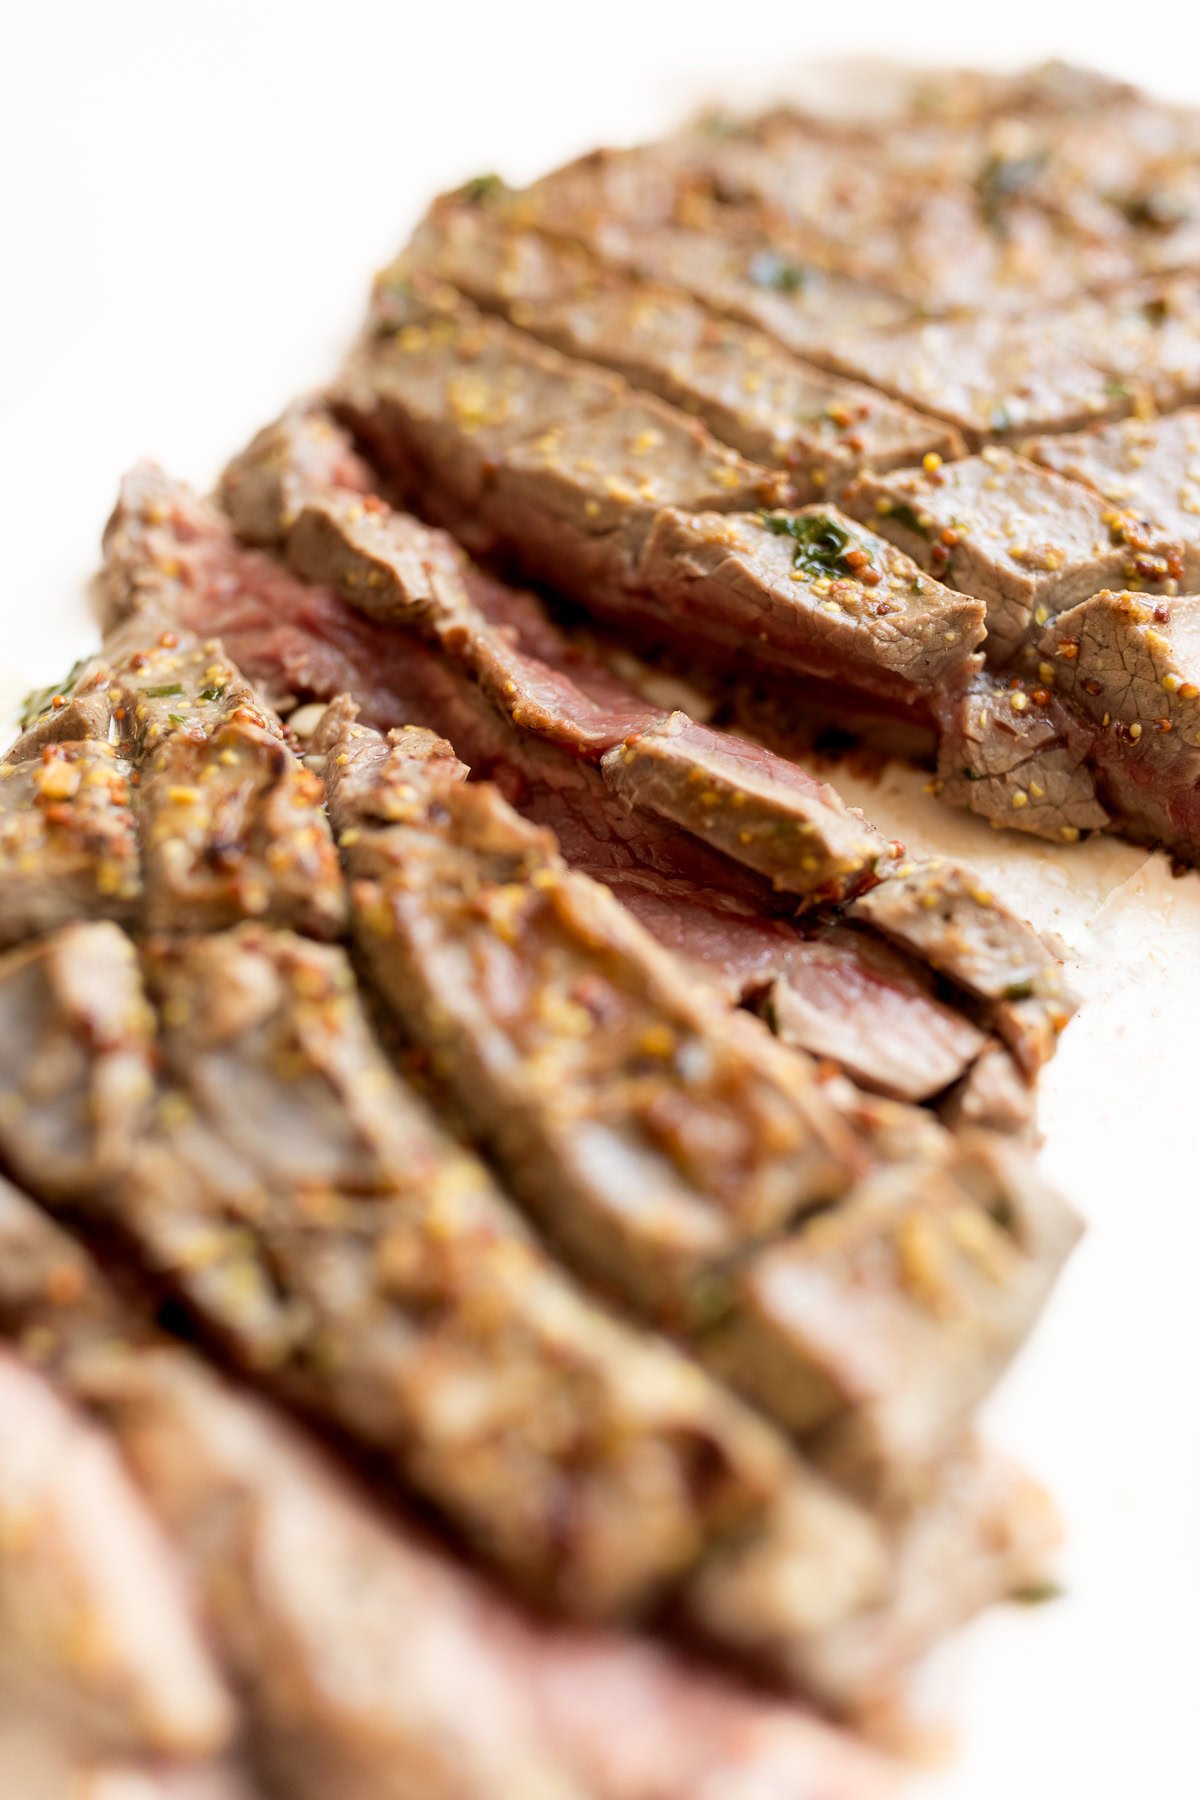 Close-up of sliced, broiled steak on a white surface, showcasing the meat's texture and seasoning. The steak appears to be medium-rare with visible herbs and spices.